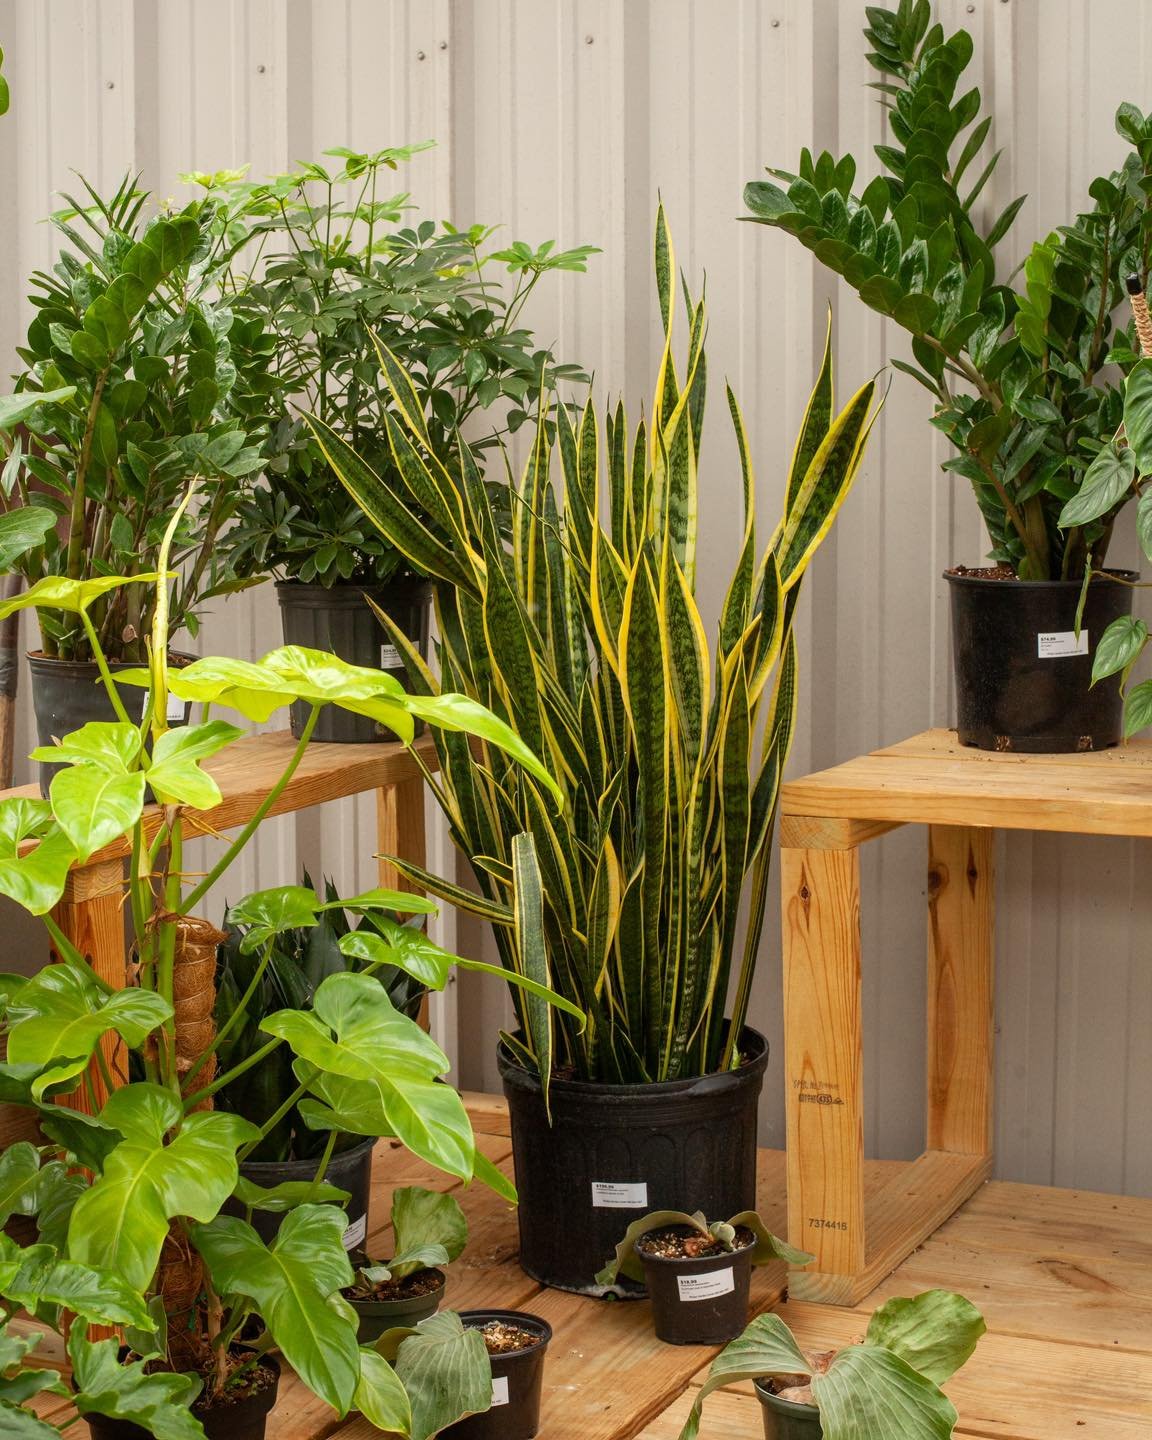 We love big houseplants! It can truly bring life to an interior. Don't forget we can also get large ones for your home or business too! Just let us know!

#houseplants #supportlocal